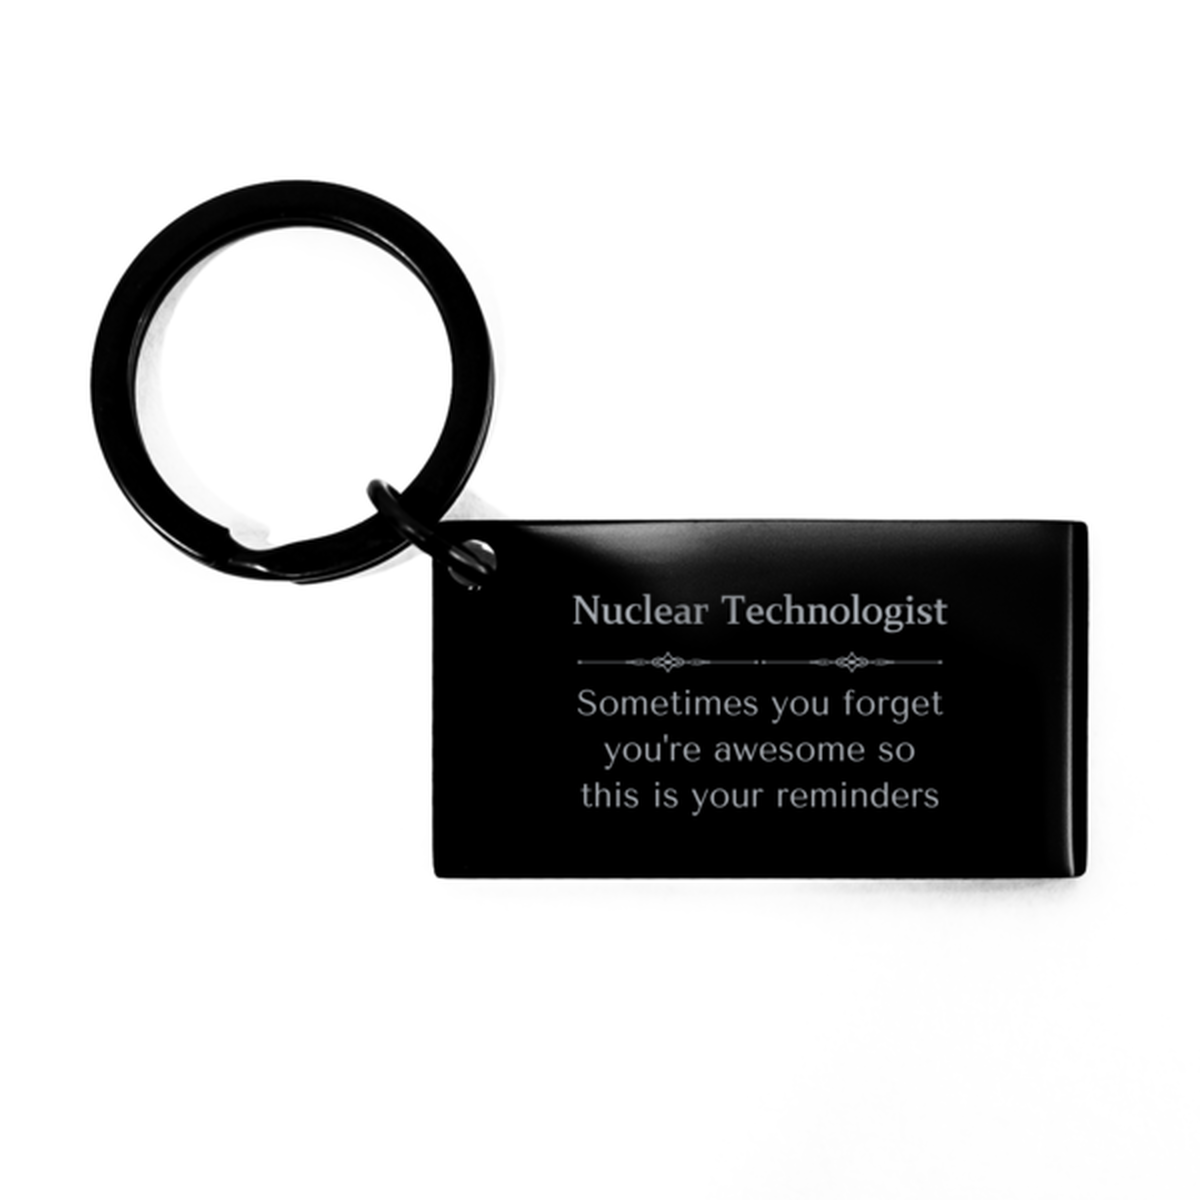 Sentimental Nuclear Technologist Keychain, Personal Assistant Sometimes you forget you're awesome so this is your reminders, Graduation Christmas Birthday Gifts for Nuclear Technologist, Men, Women, Coworkers